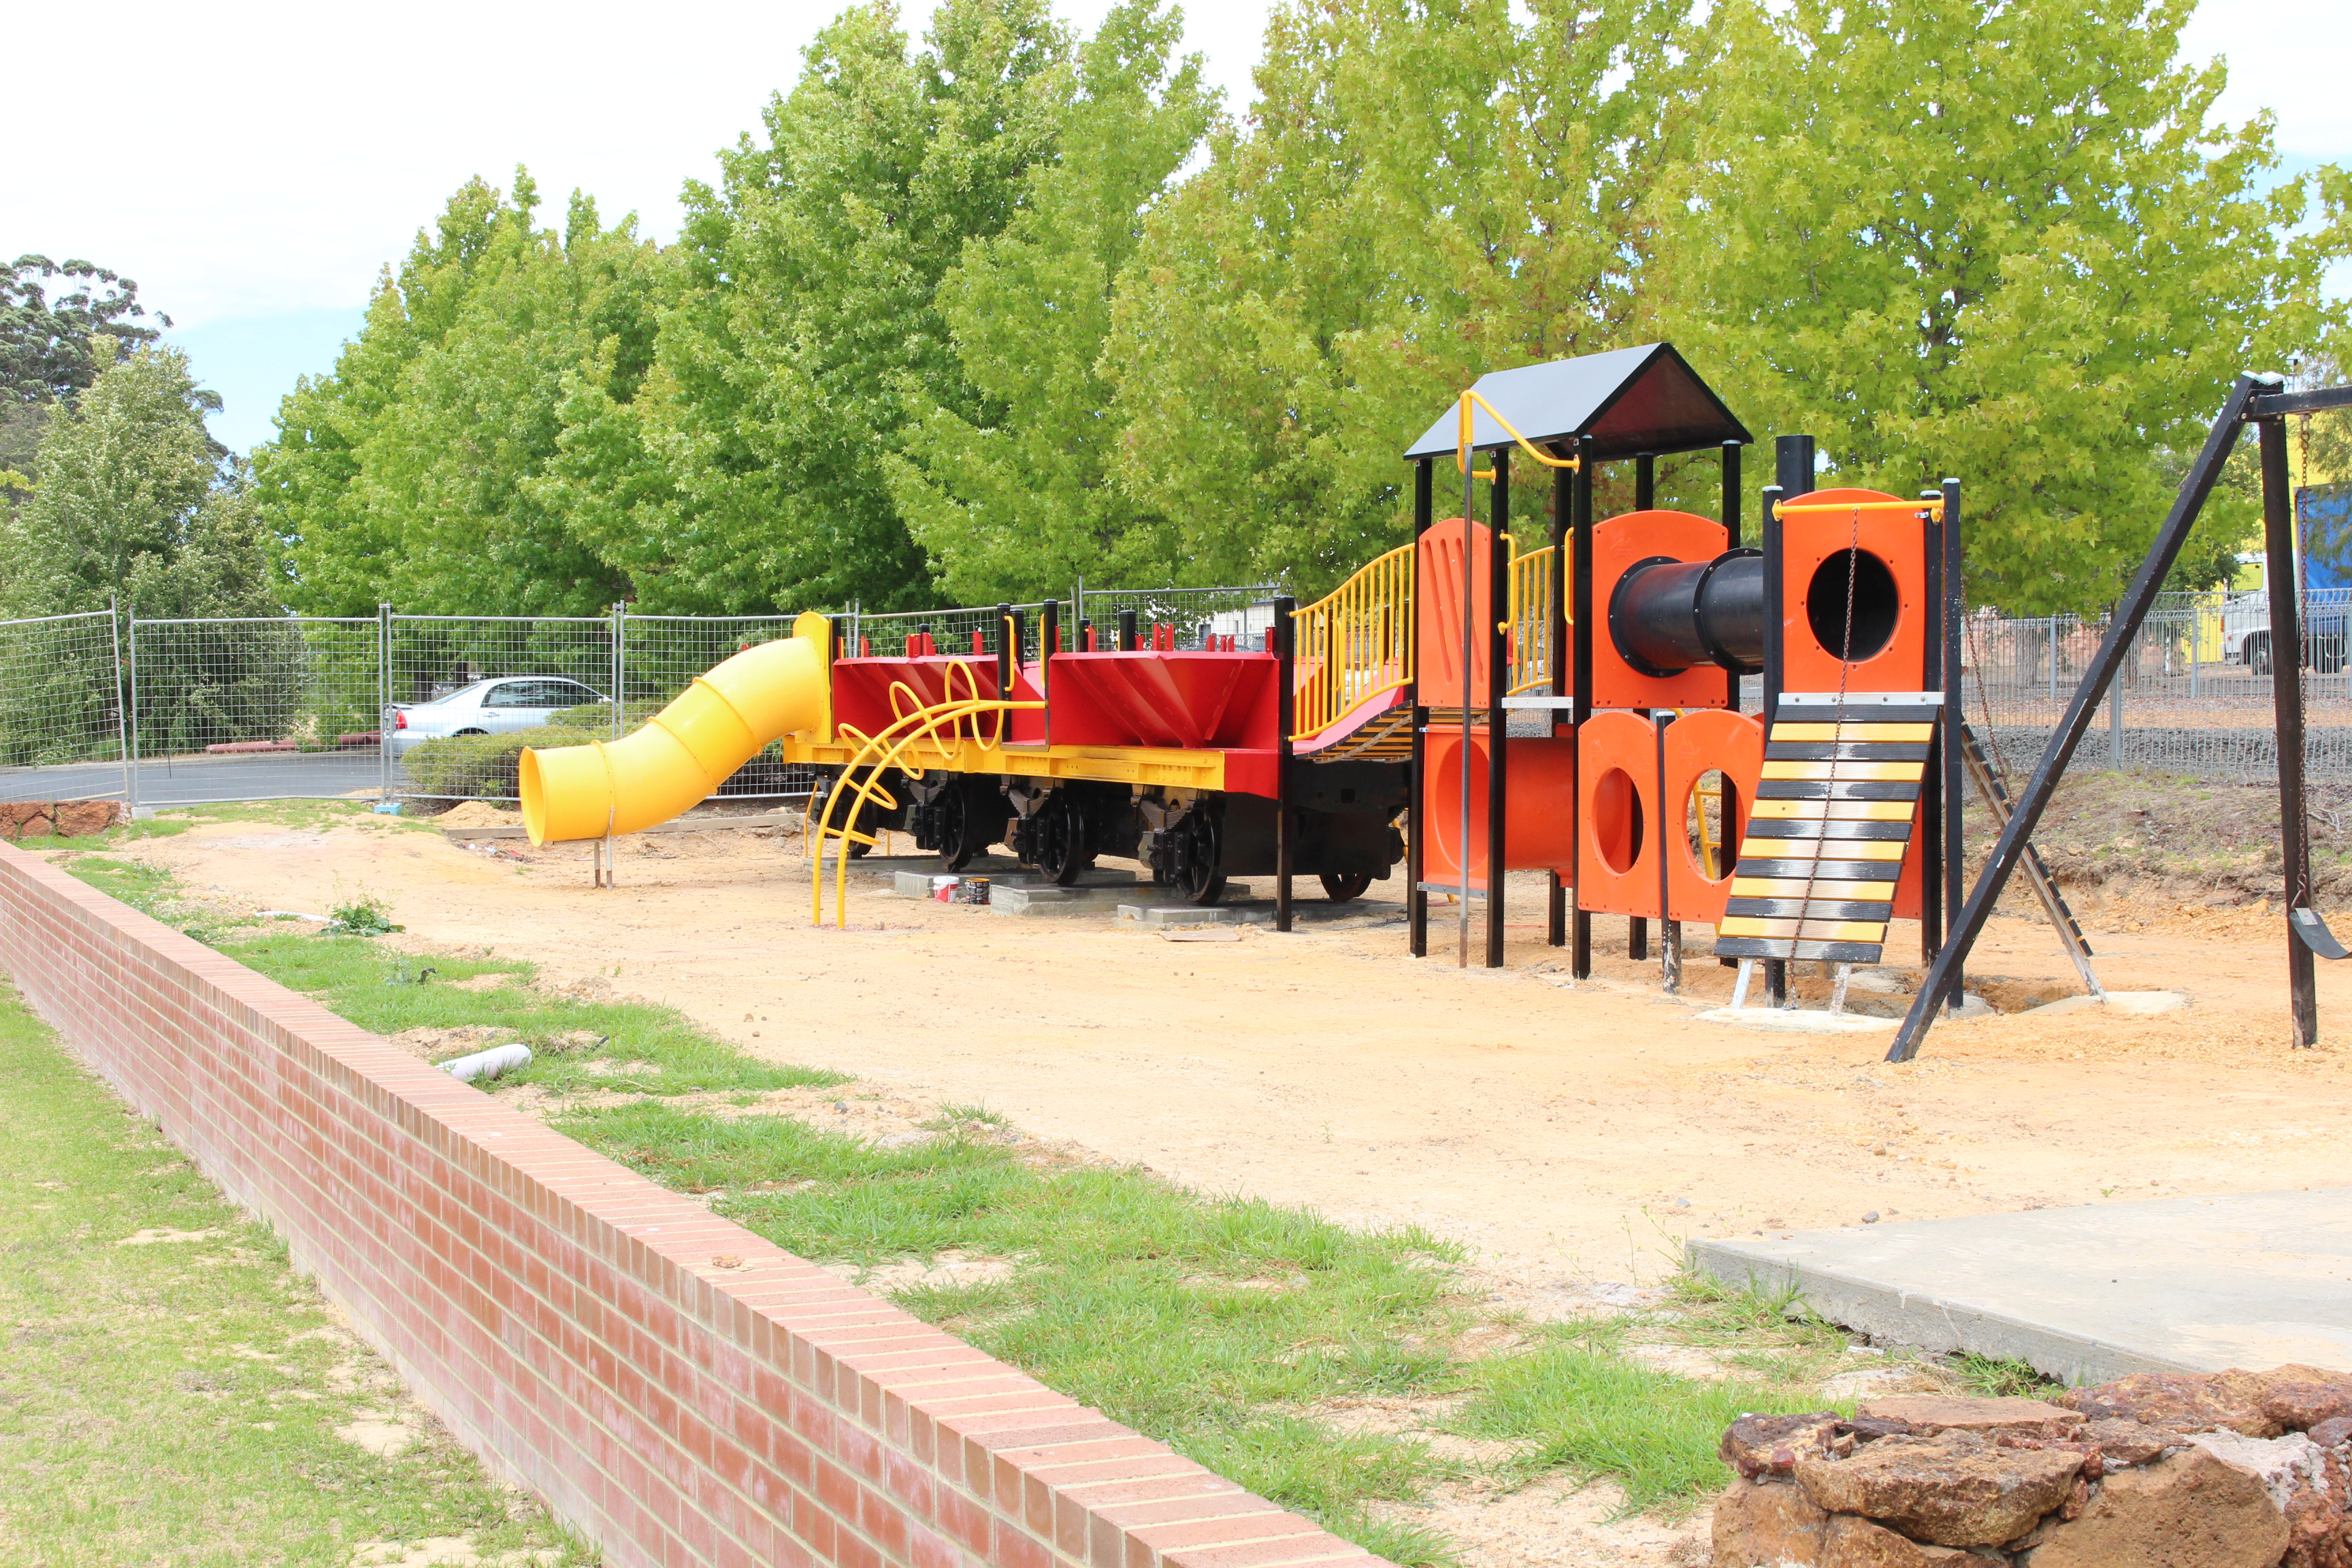 train playground equipment in Linear park.